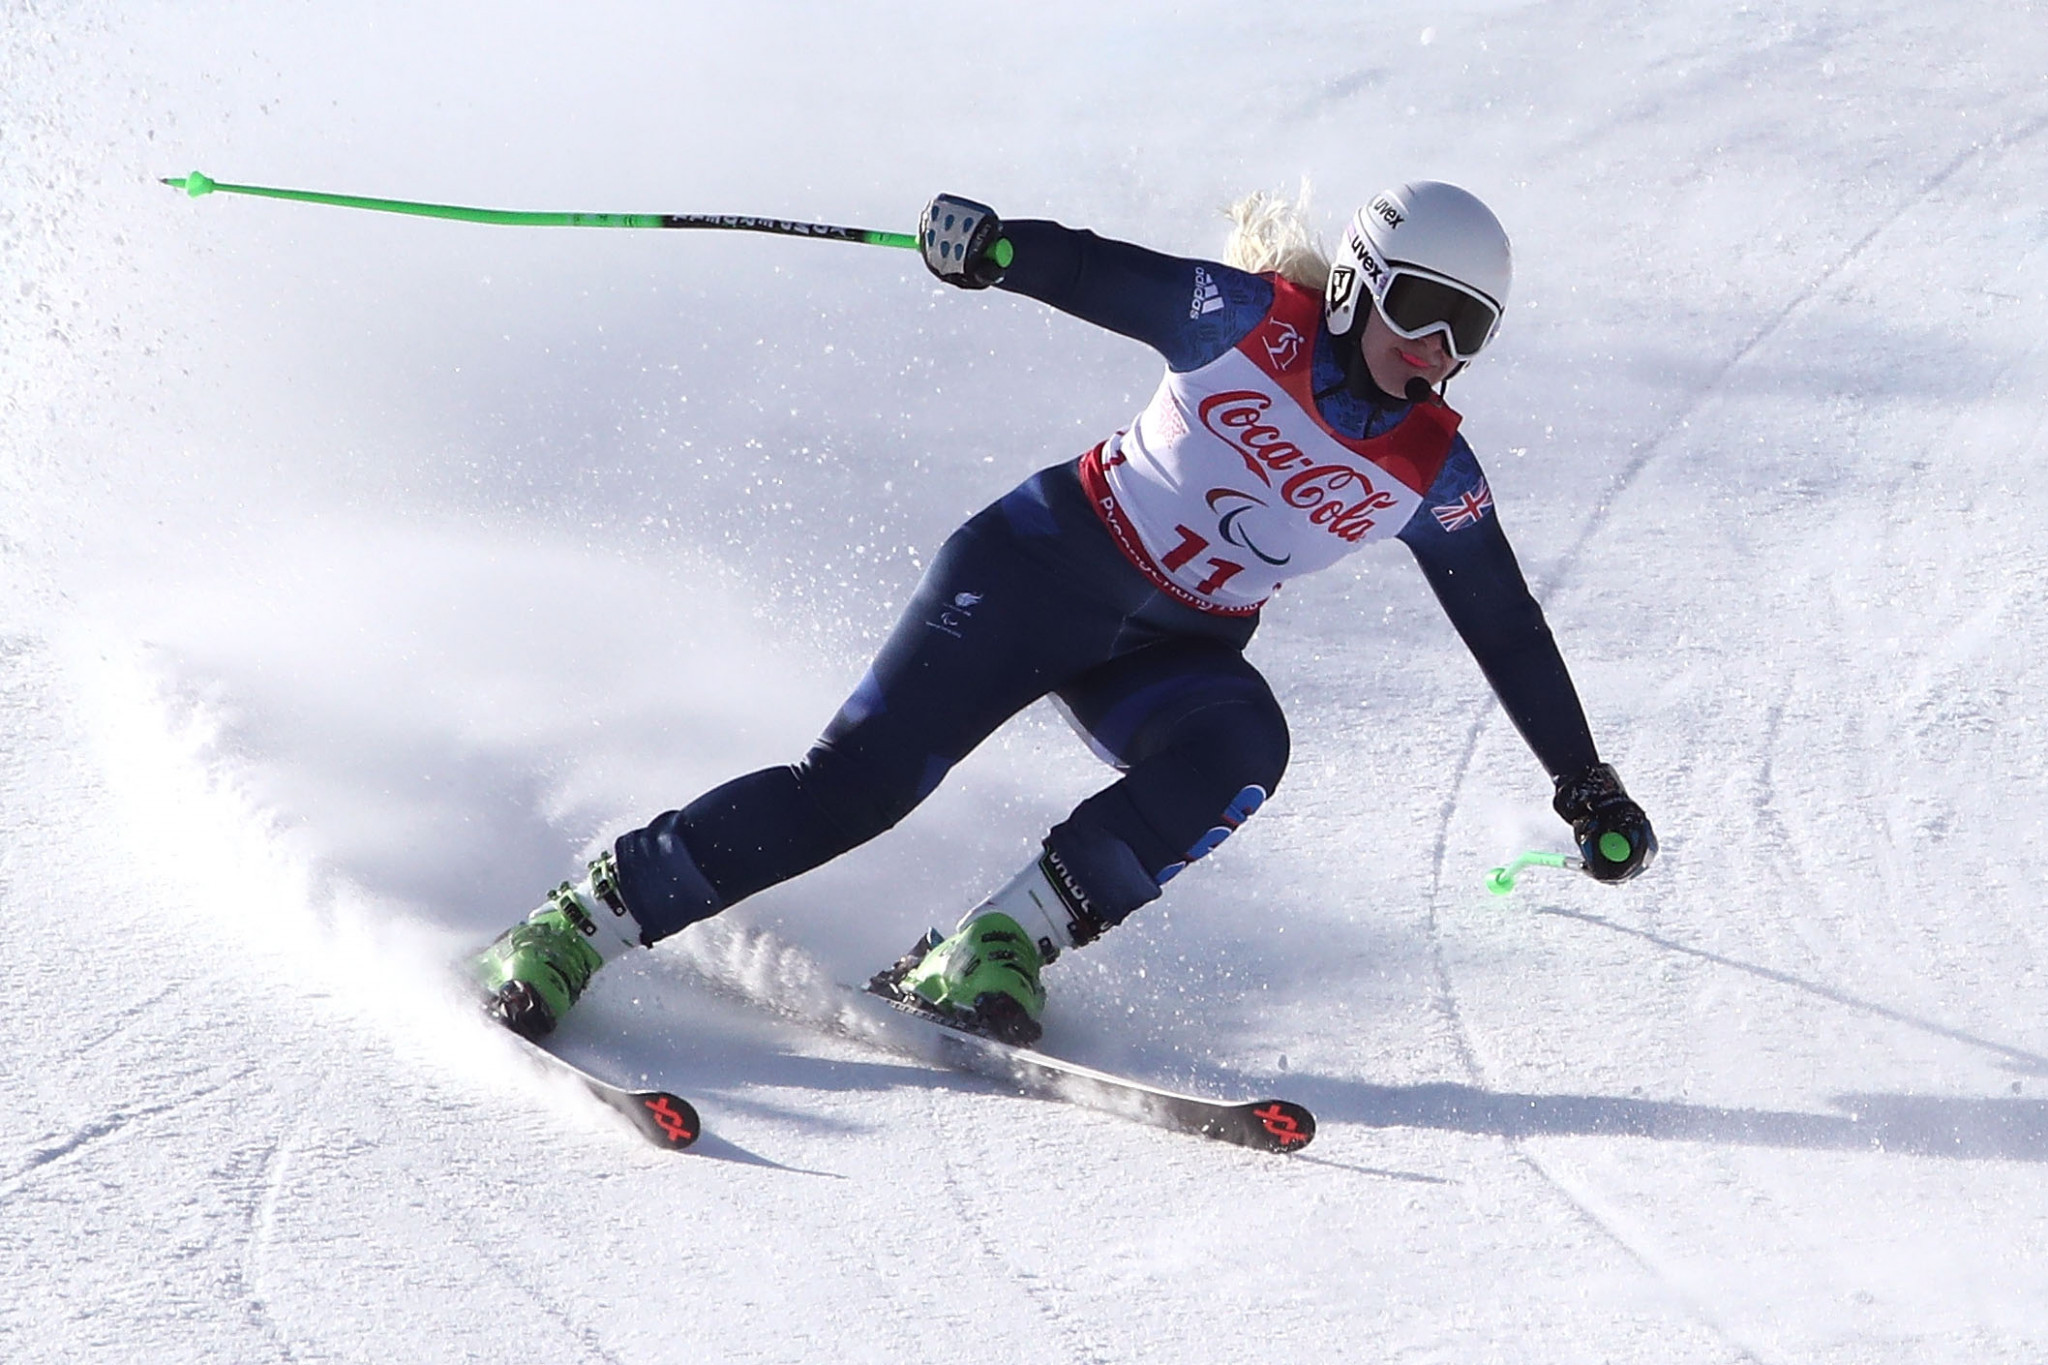 Britain's Kelly Gallagher had another winning day at the World Para Alpine Skiing Europa Cup at St Moritz ©Getty Images